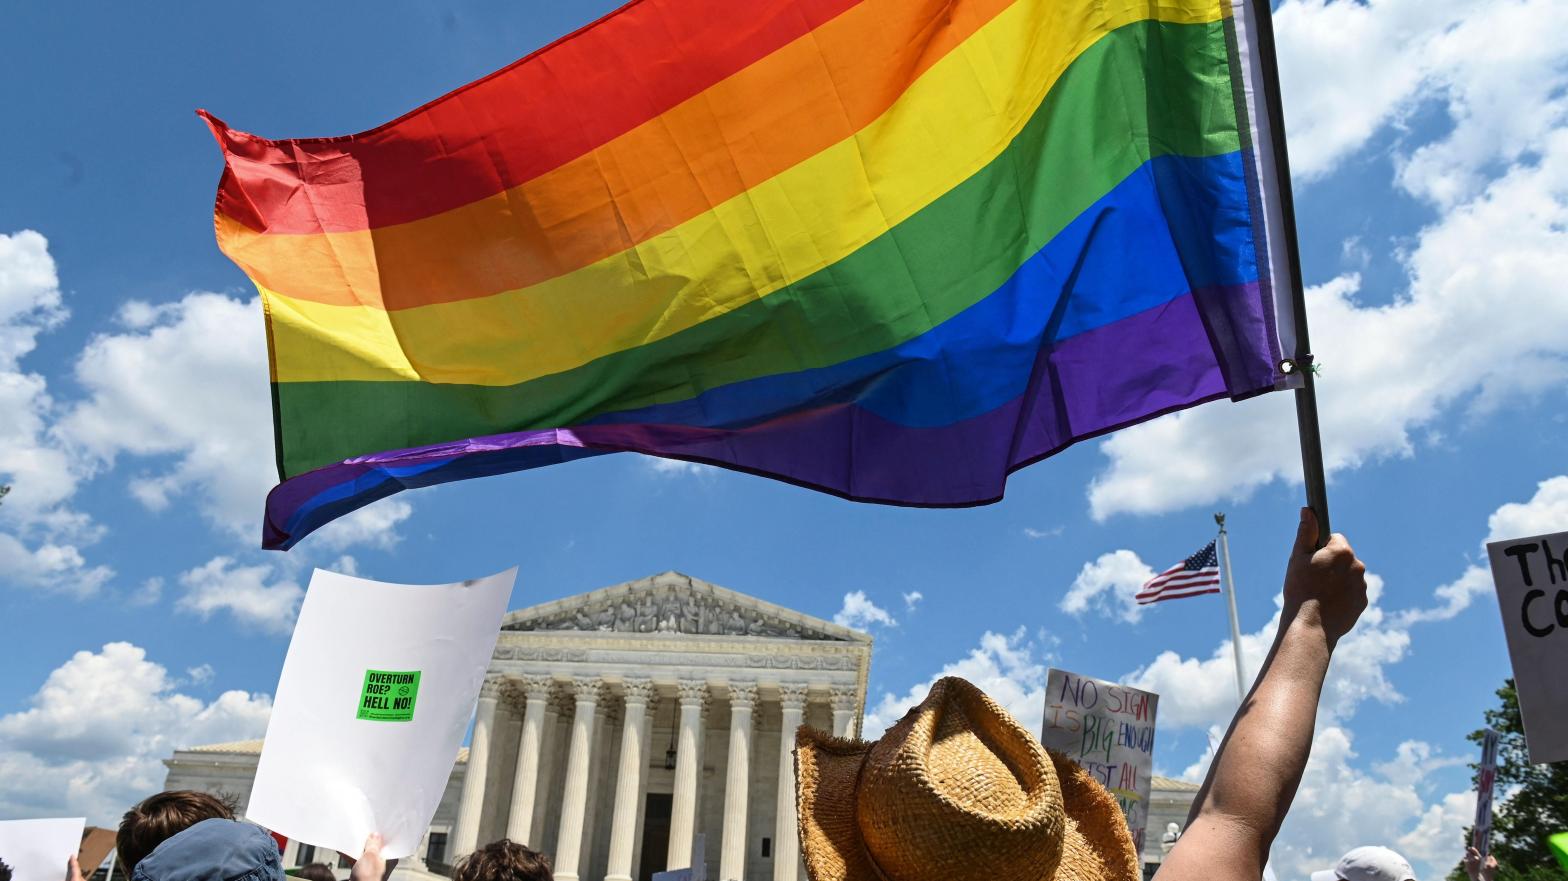 Protesters wave a Pride flag in front of the Supreme Court a day after the Court struck down Roe v. Wade. (Photo: Roberto Schmidt/AFP, Getty Images)